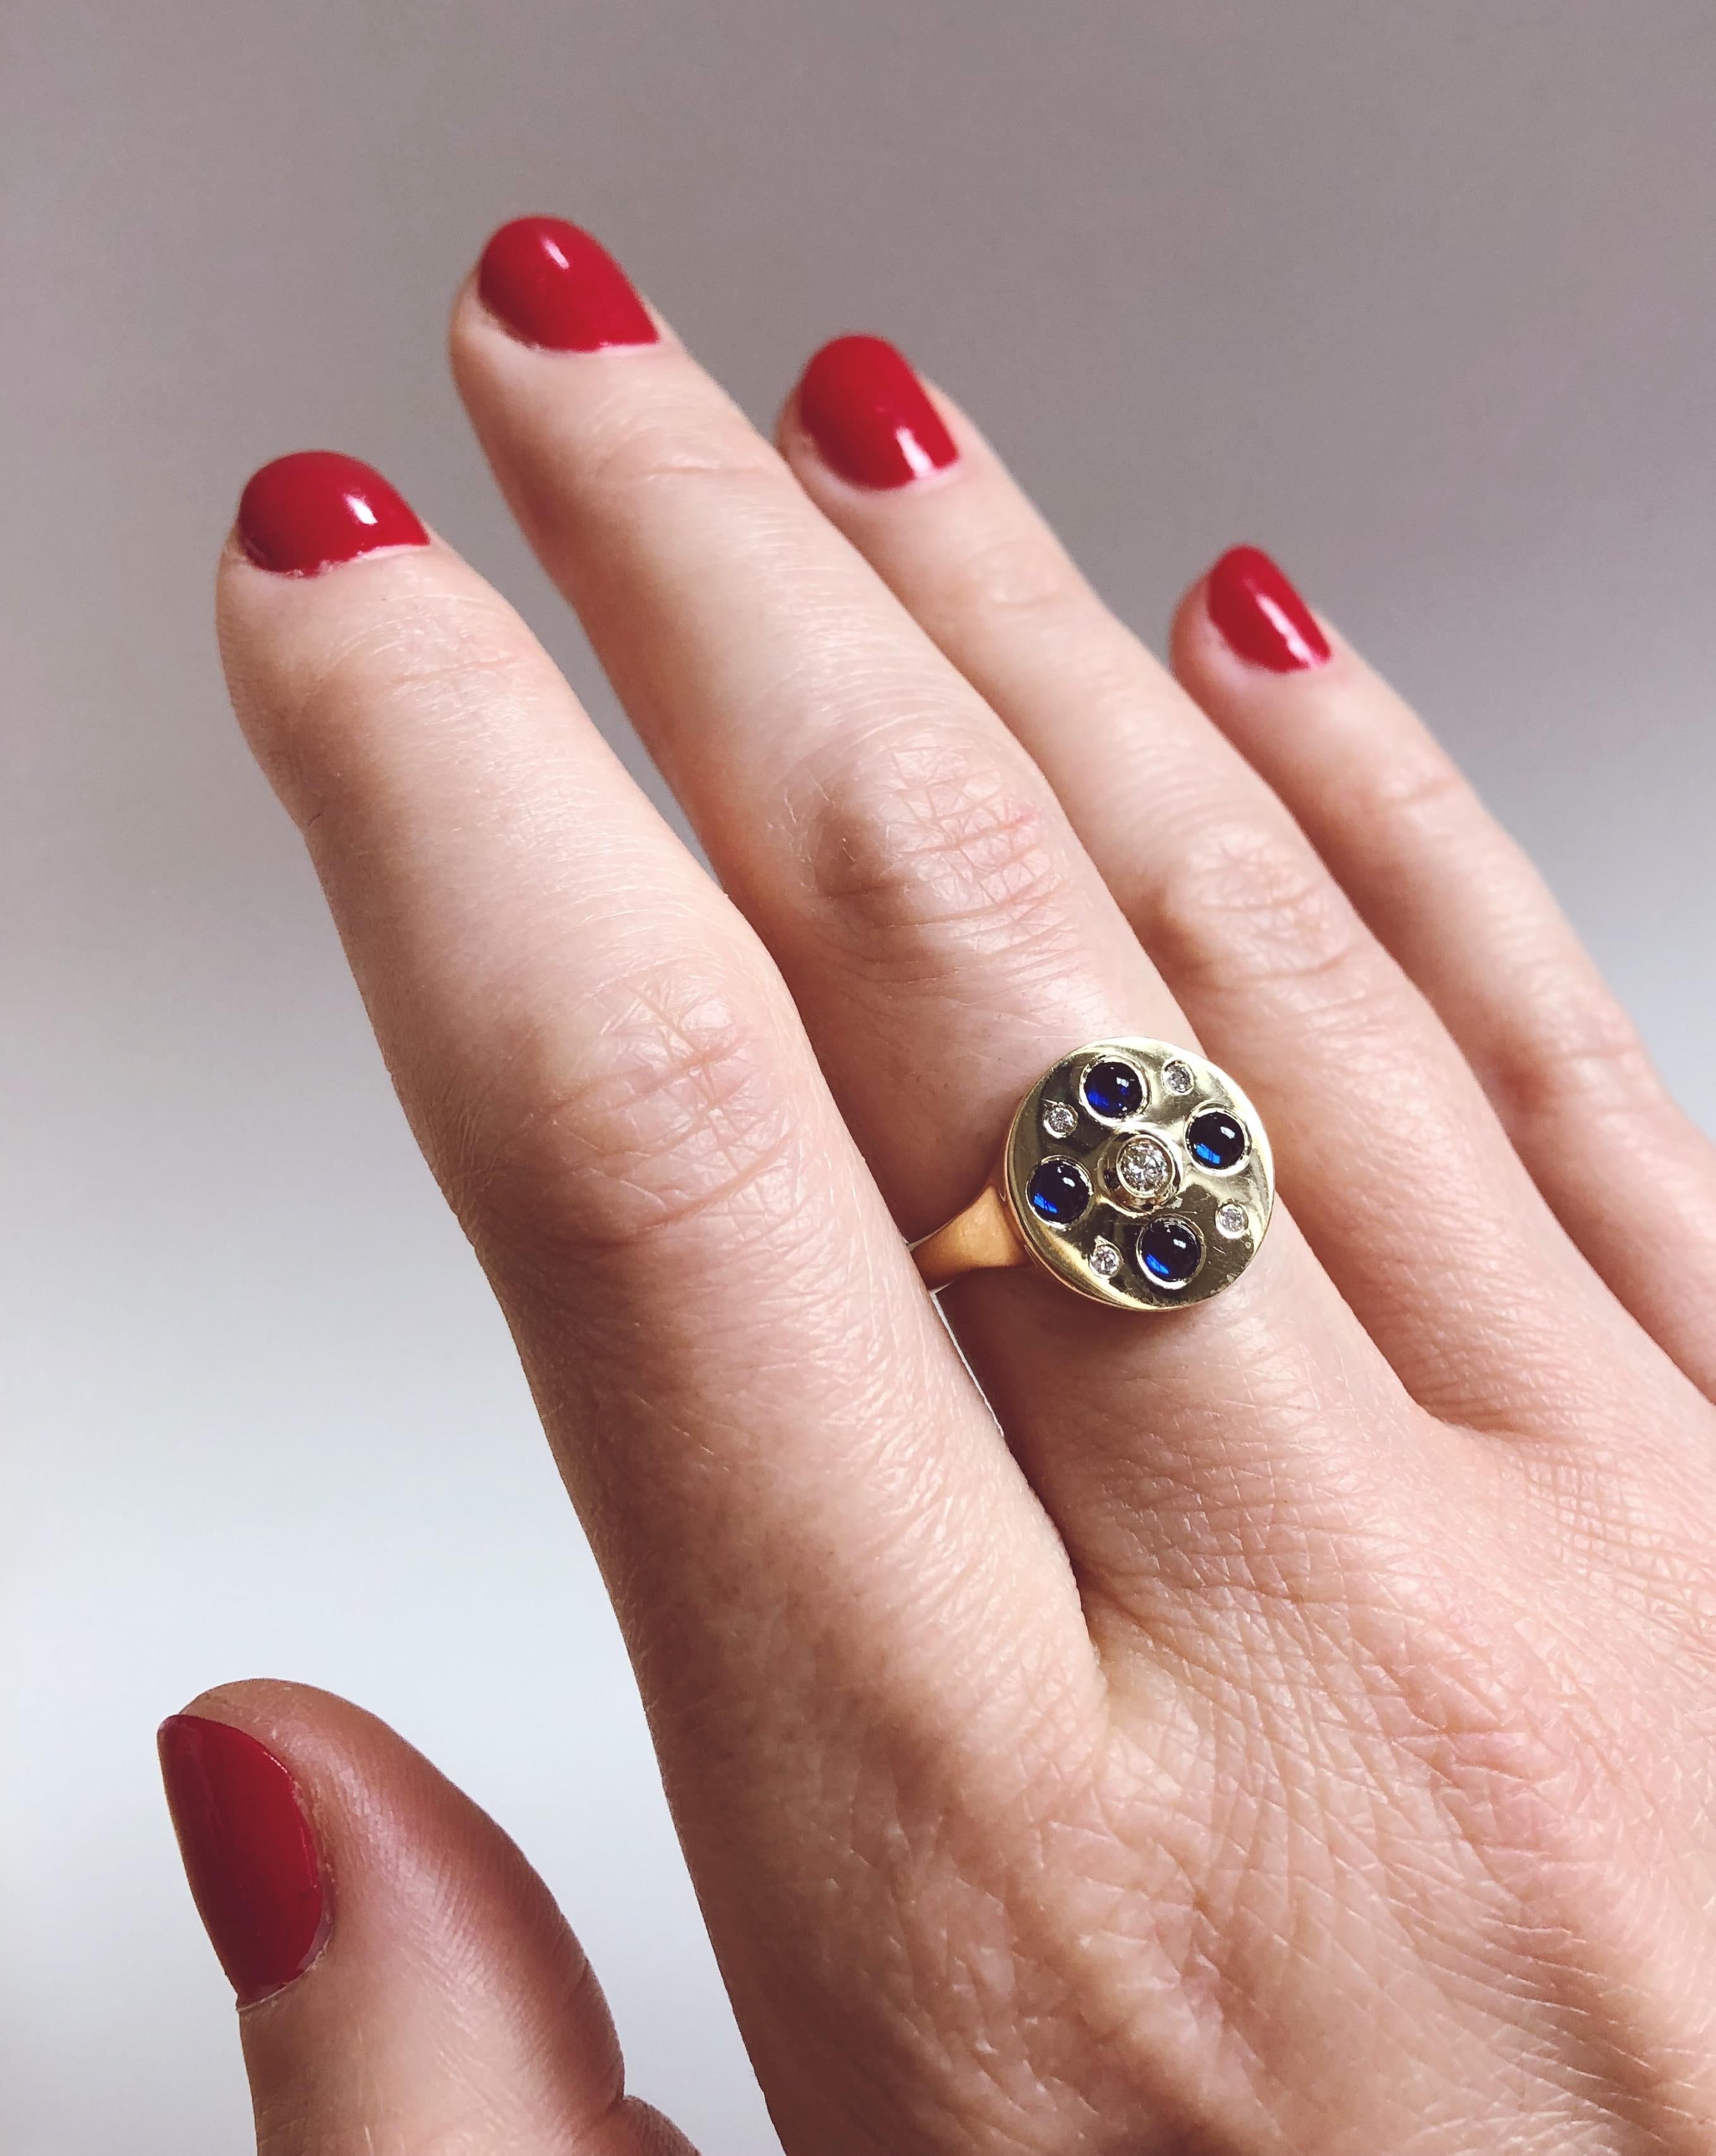 The Demeter Ring with Sapphire from modern fine jewelry house, Baker & Black. A geometric arrangement of gems give this understated cocktail ring a distinctly graphic edge, offset by the soft sapphire cabochons.

• sapphire cabochons, measuring 4mm